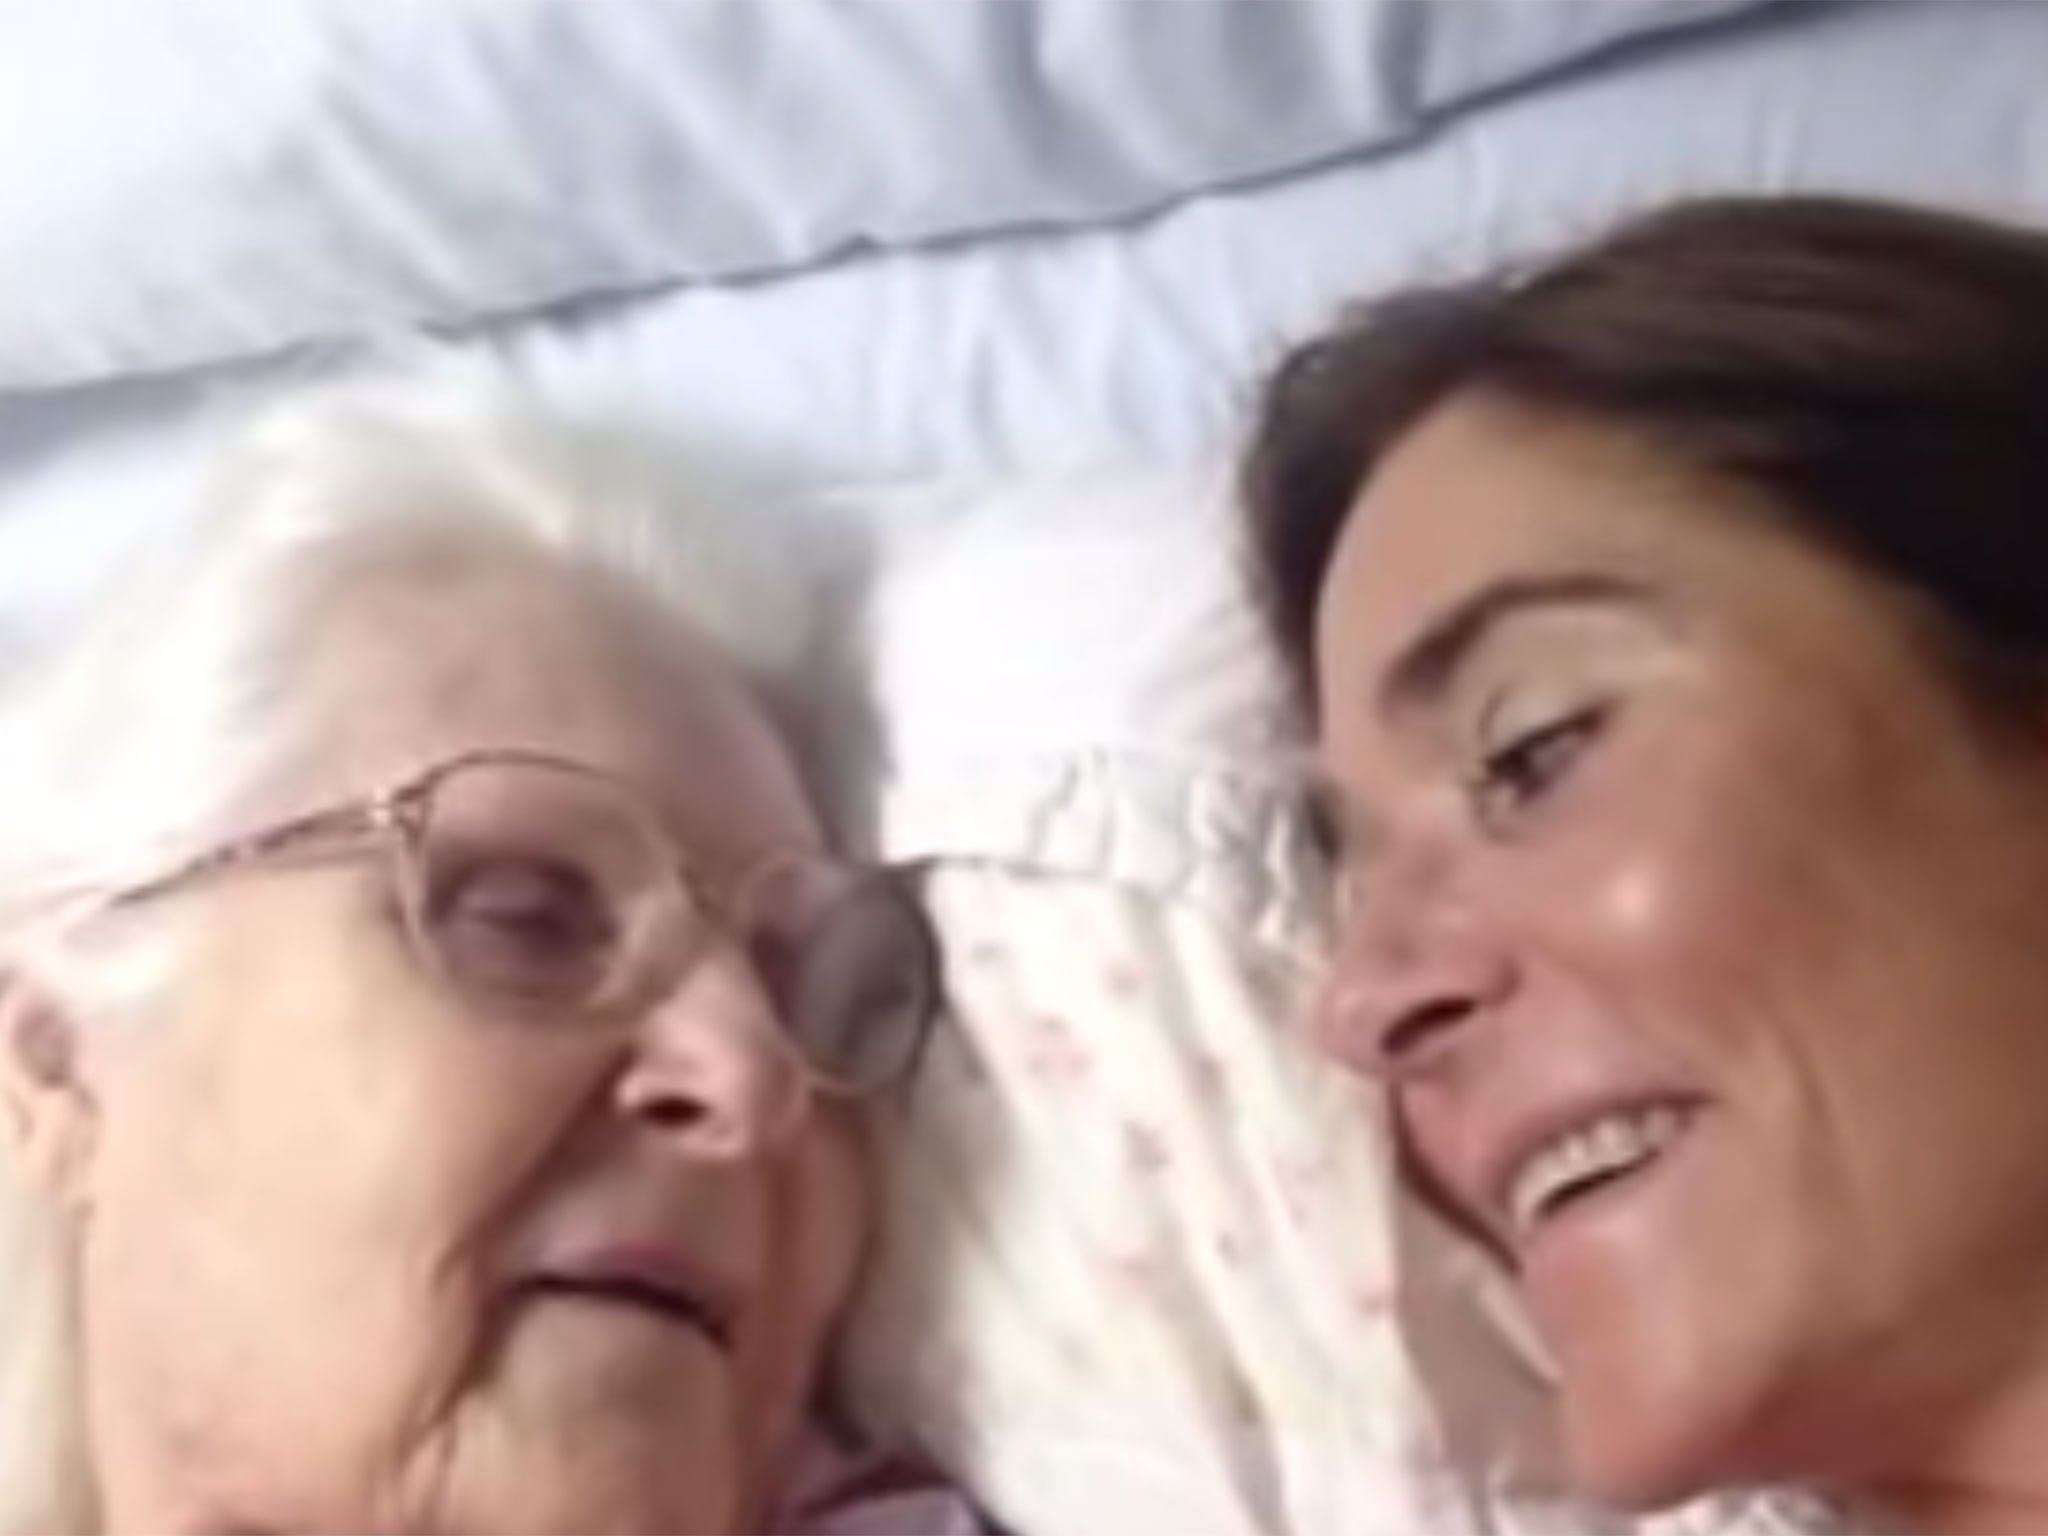 An 87-year-old Alzheimer's patient briefly remembers who her daughter is in a heart-warming video.